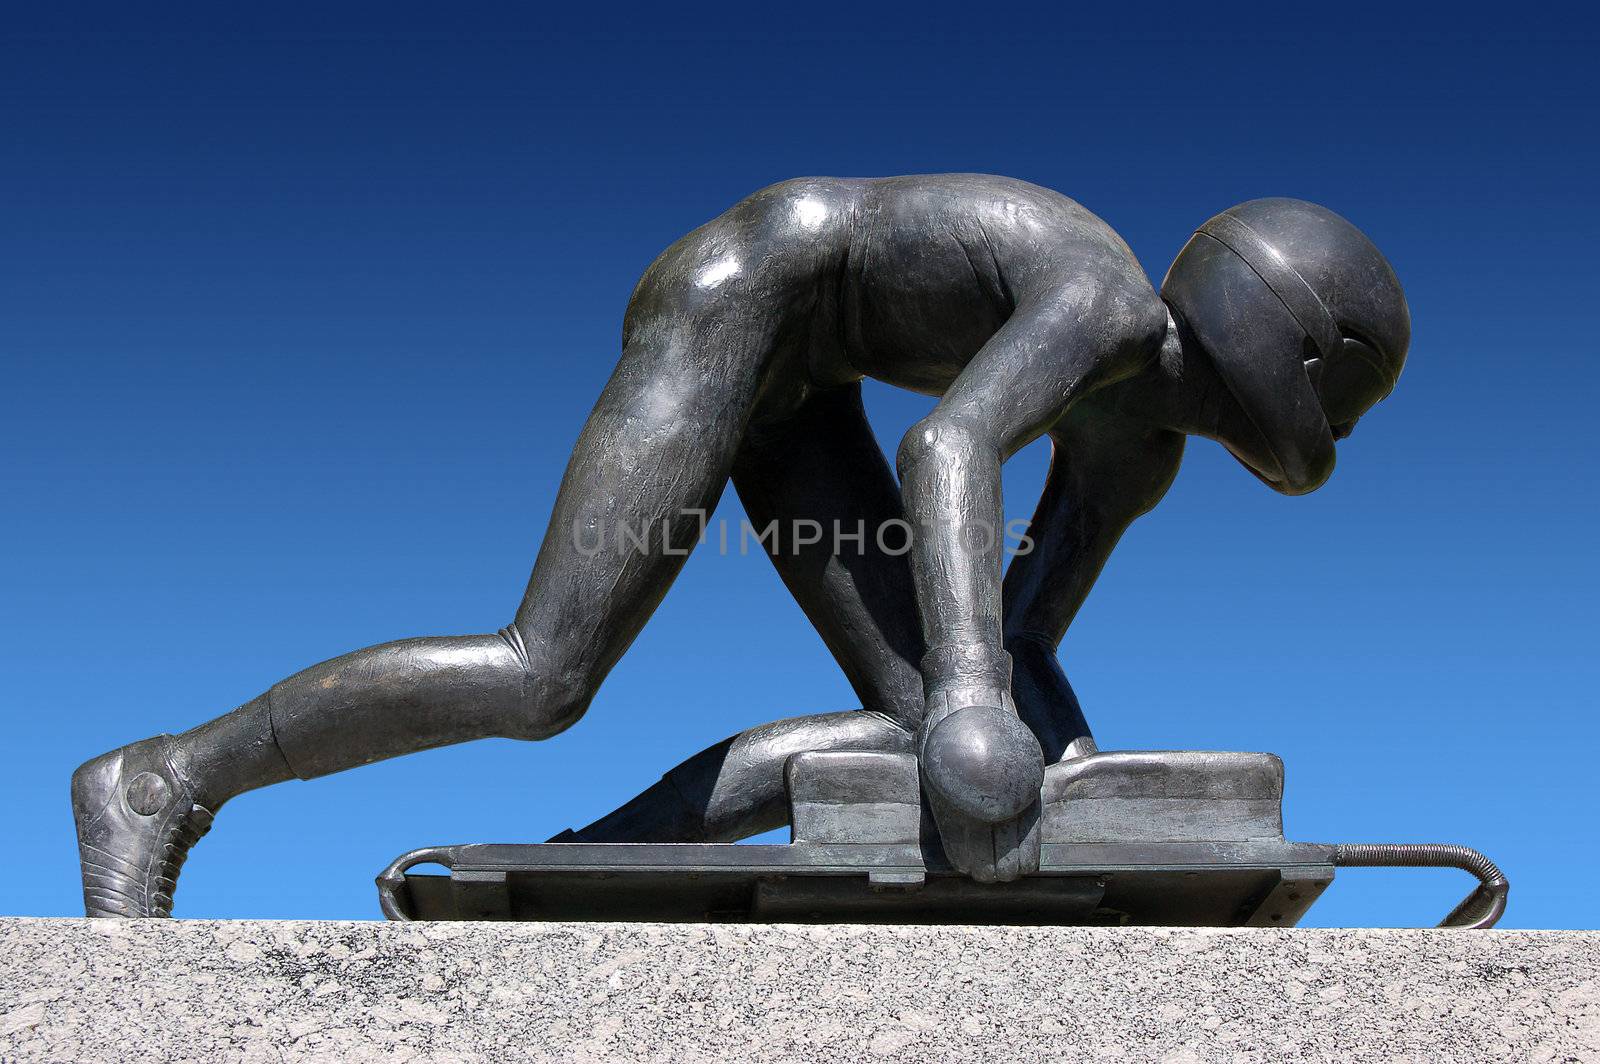 Bronze sculpture depicting the Olympic sport of Skeleton